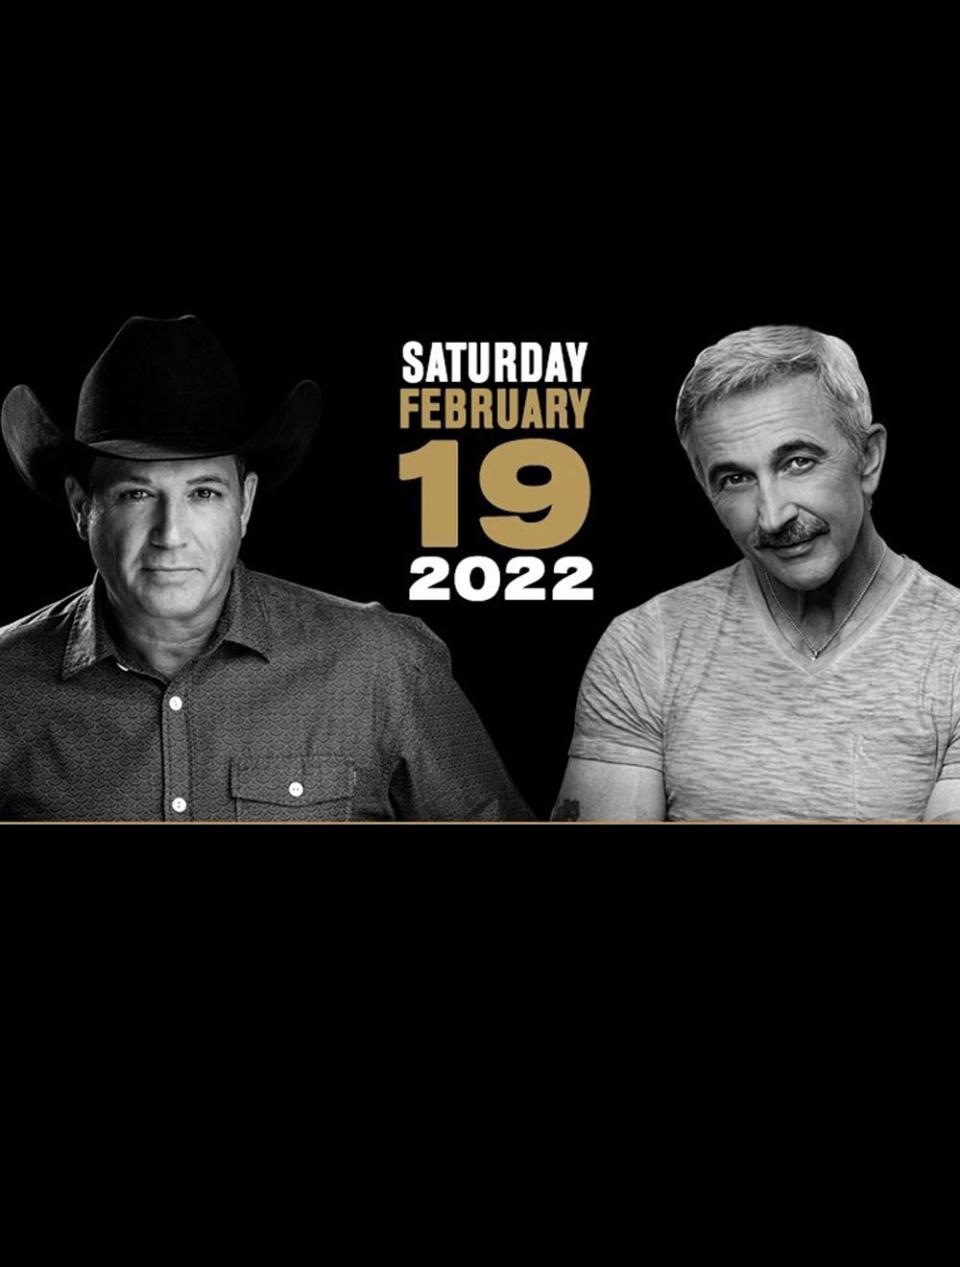 Country music artists Tracy Byrd and Aaron Tippin will perform Saturday at the Canton Palace Theatre.